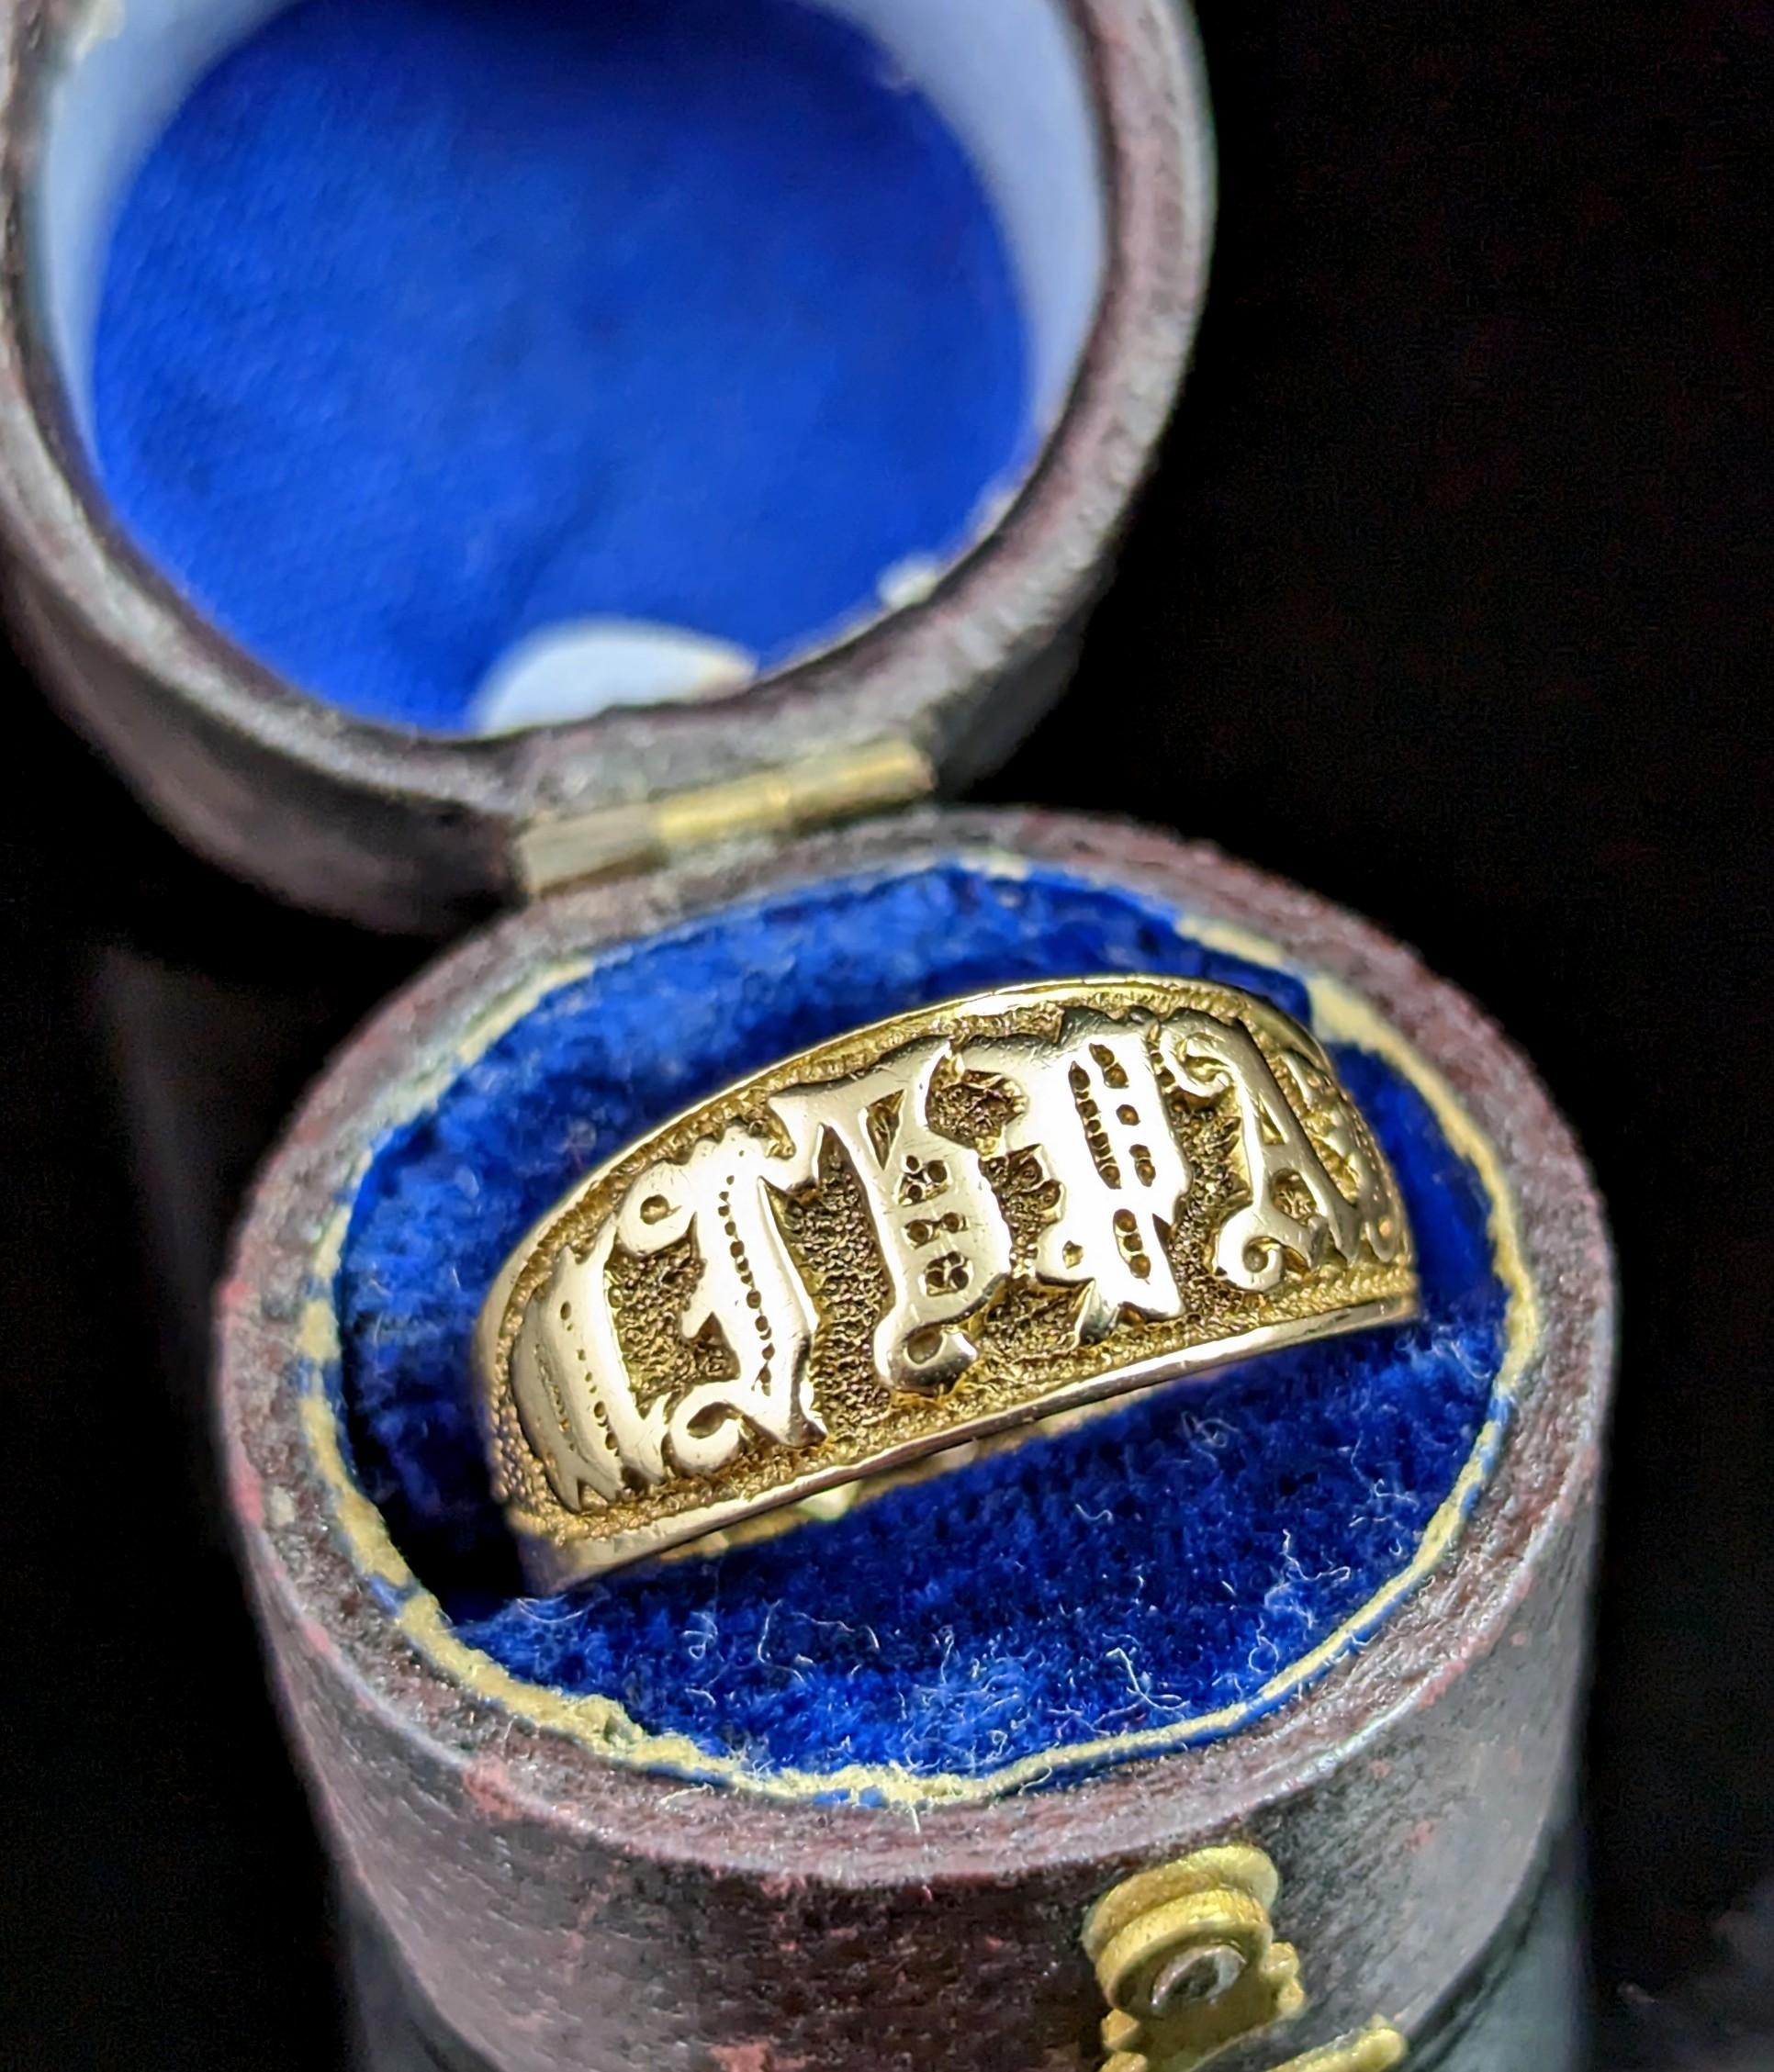 You can't help but be charmed by this beautiful, Victorian 18kt yellow gold Mizpah ring.

A stunning piece with a wide face and gothic lettering across the front spelling out the word Mizpah.

Mizpah is an old Biblical Hebrew term meaning watchtower